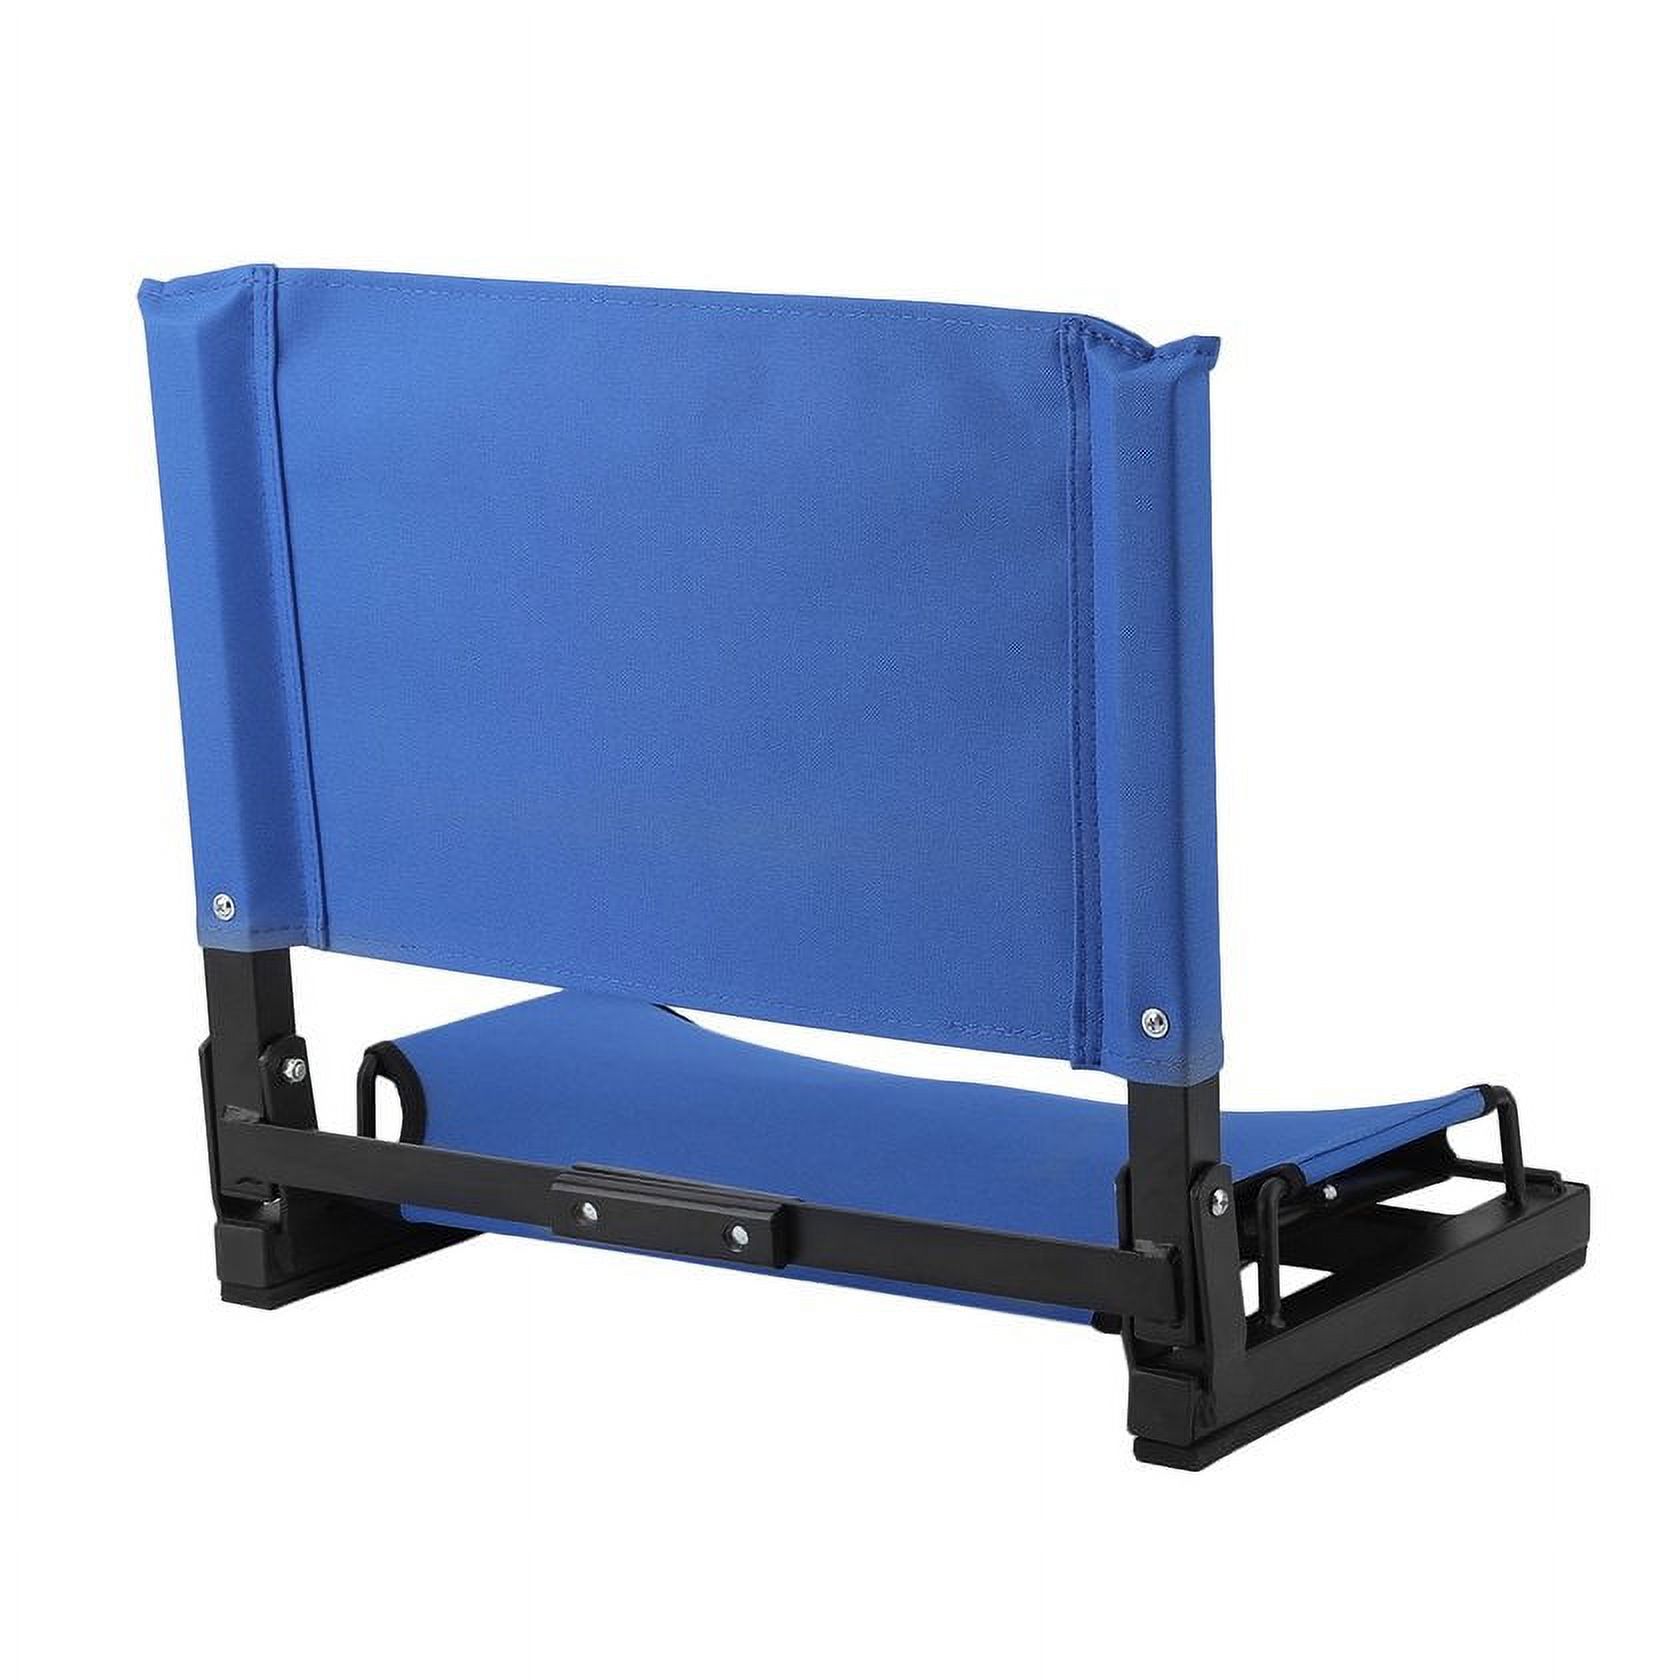 Bleacher Seats With Backs And Cushion，Folding Portable Stadium Bleacher Cushion Chair Durable Padded Seat With Back - image 2 of 7